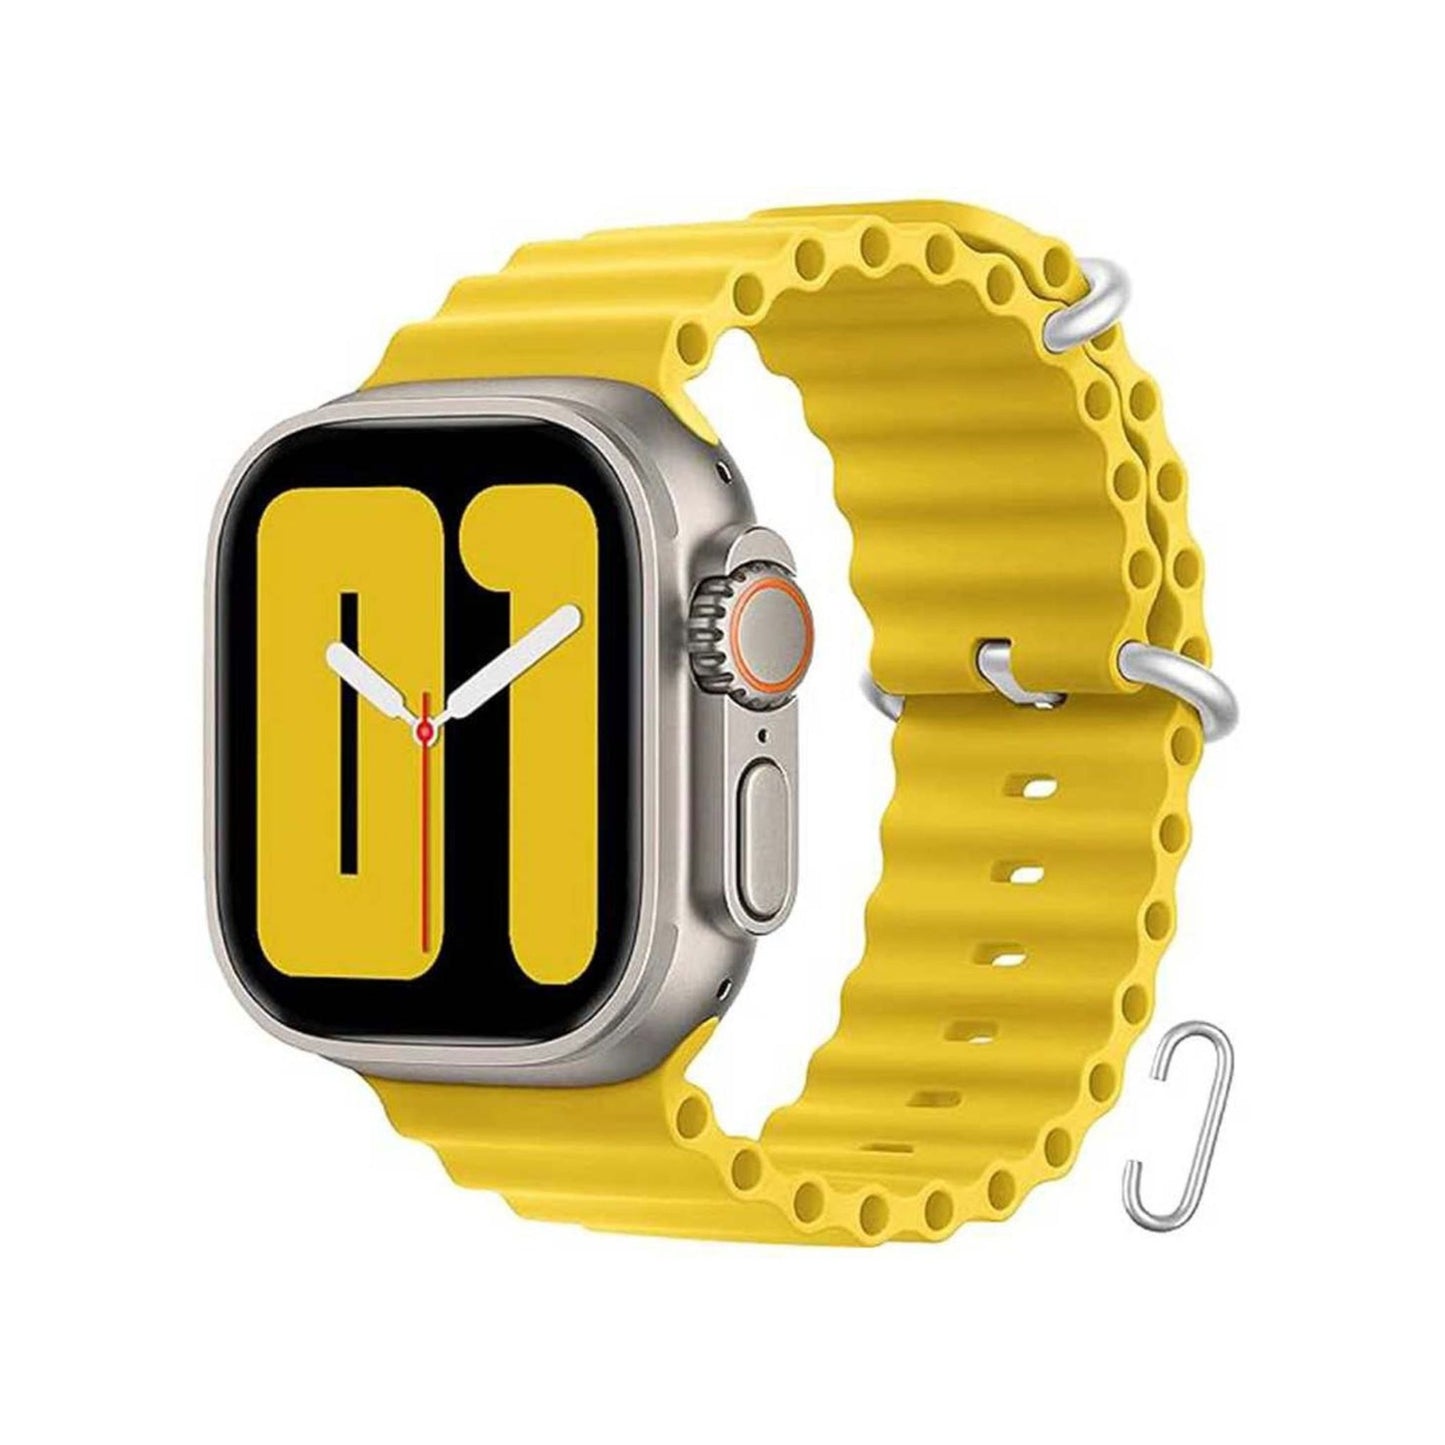 Green Lion Felex Silicone Strap For iWatch_Yellow